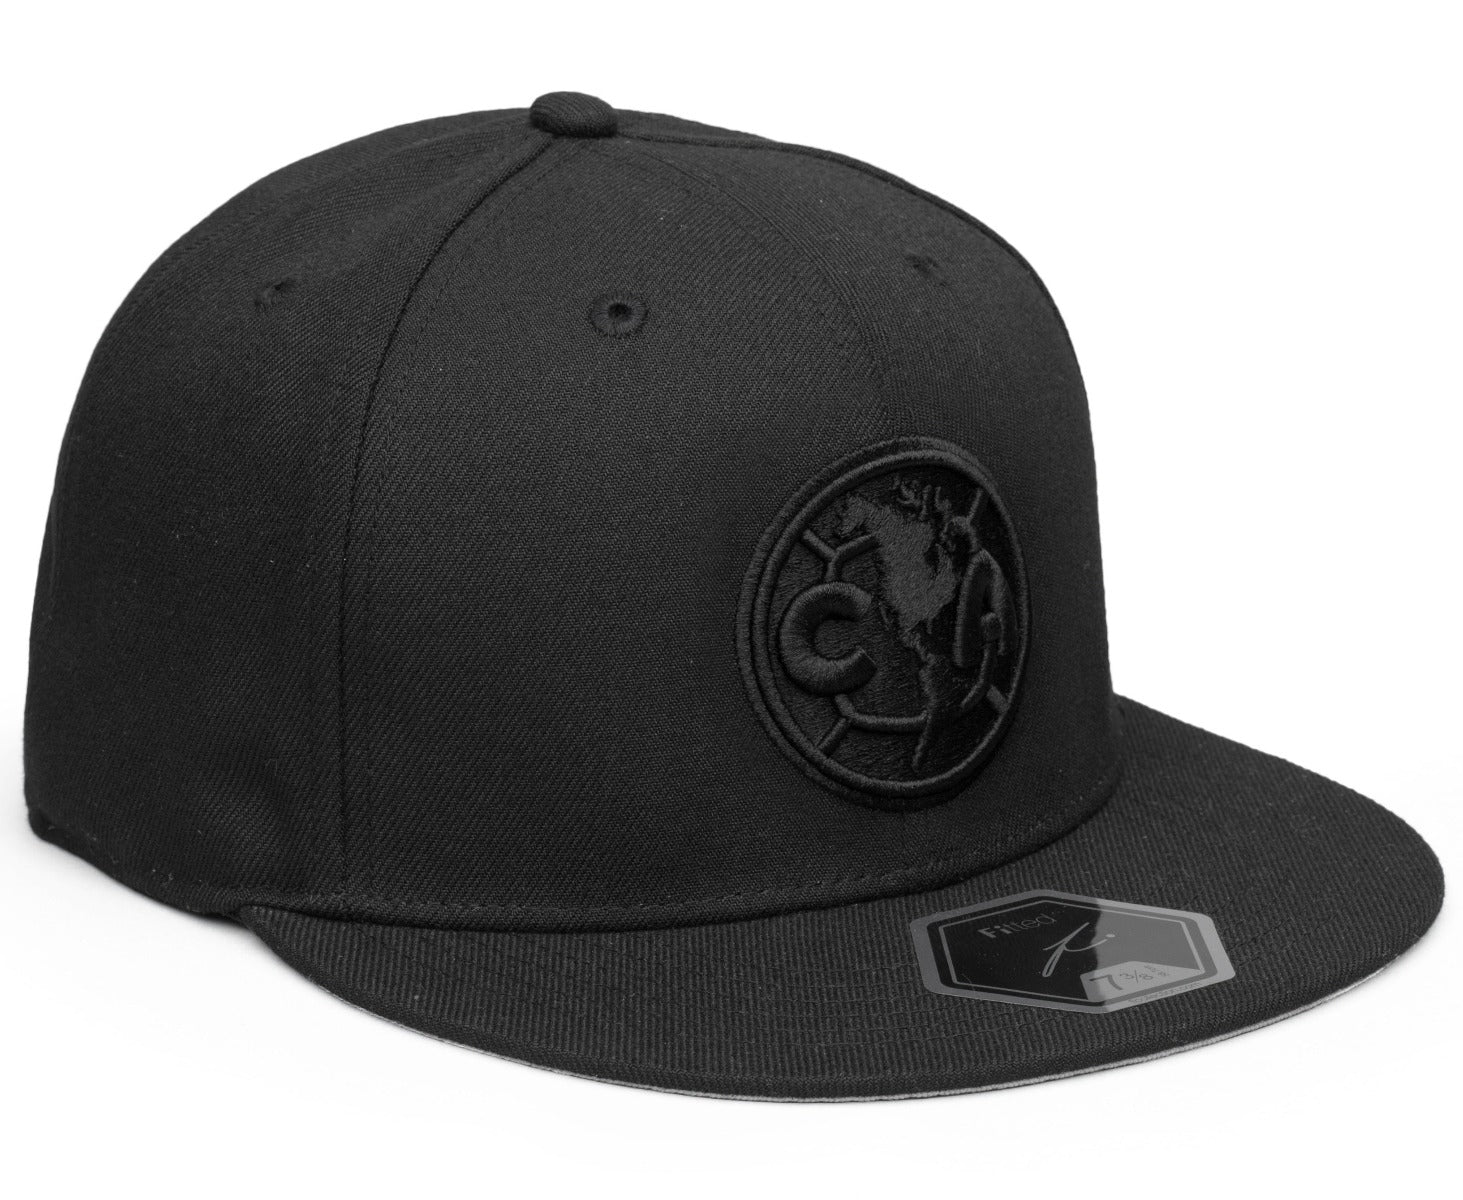 FI COLLECTIONS CLUB AMERICA DUSK FITTED HAT